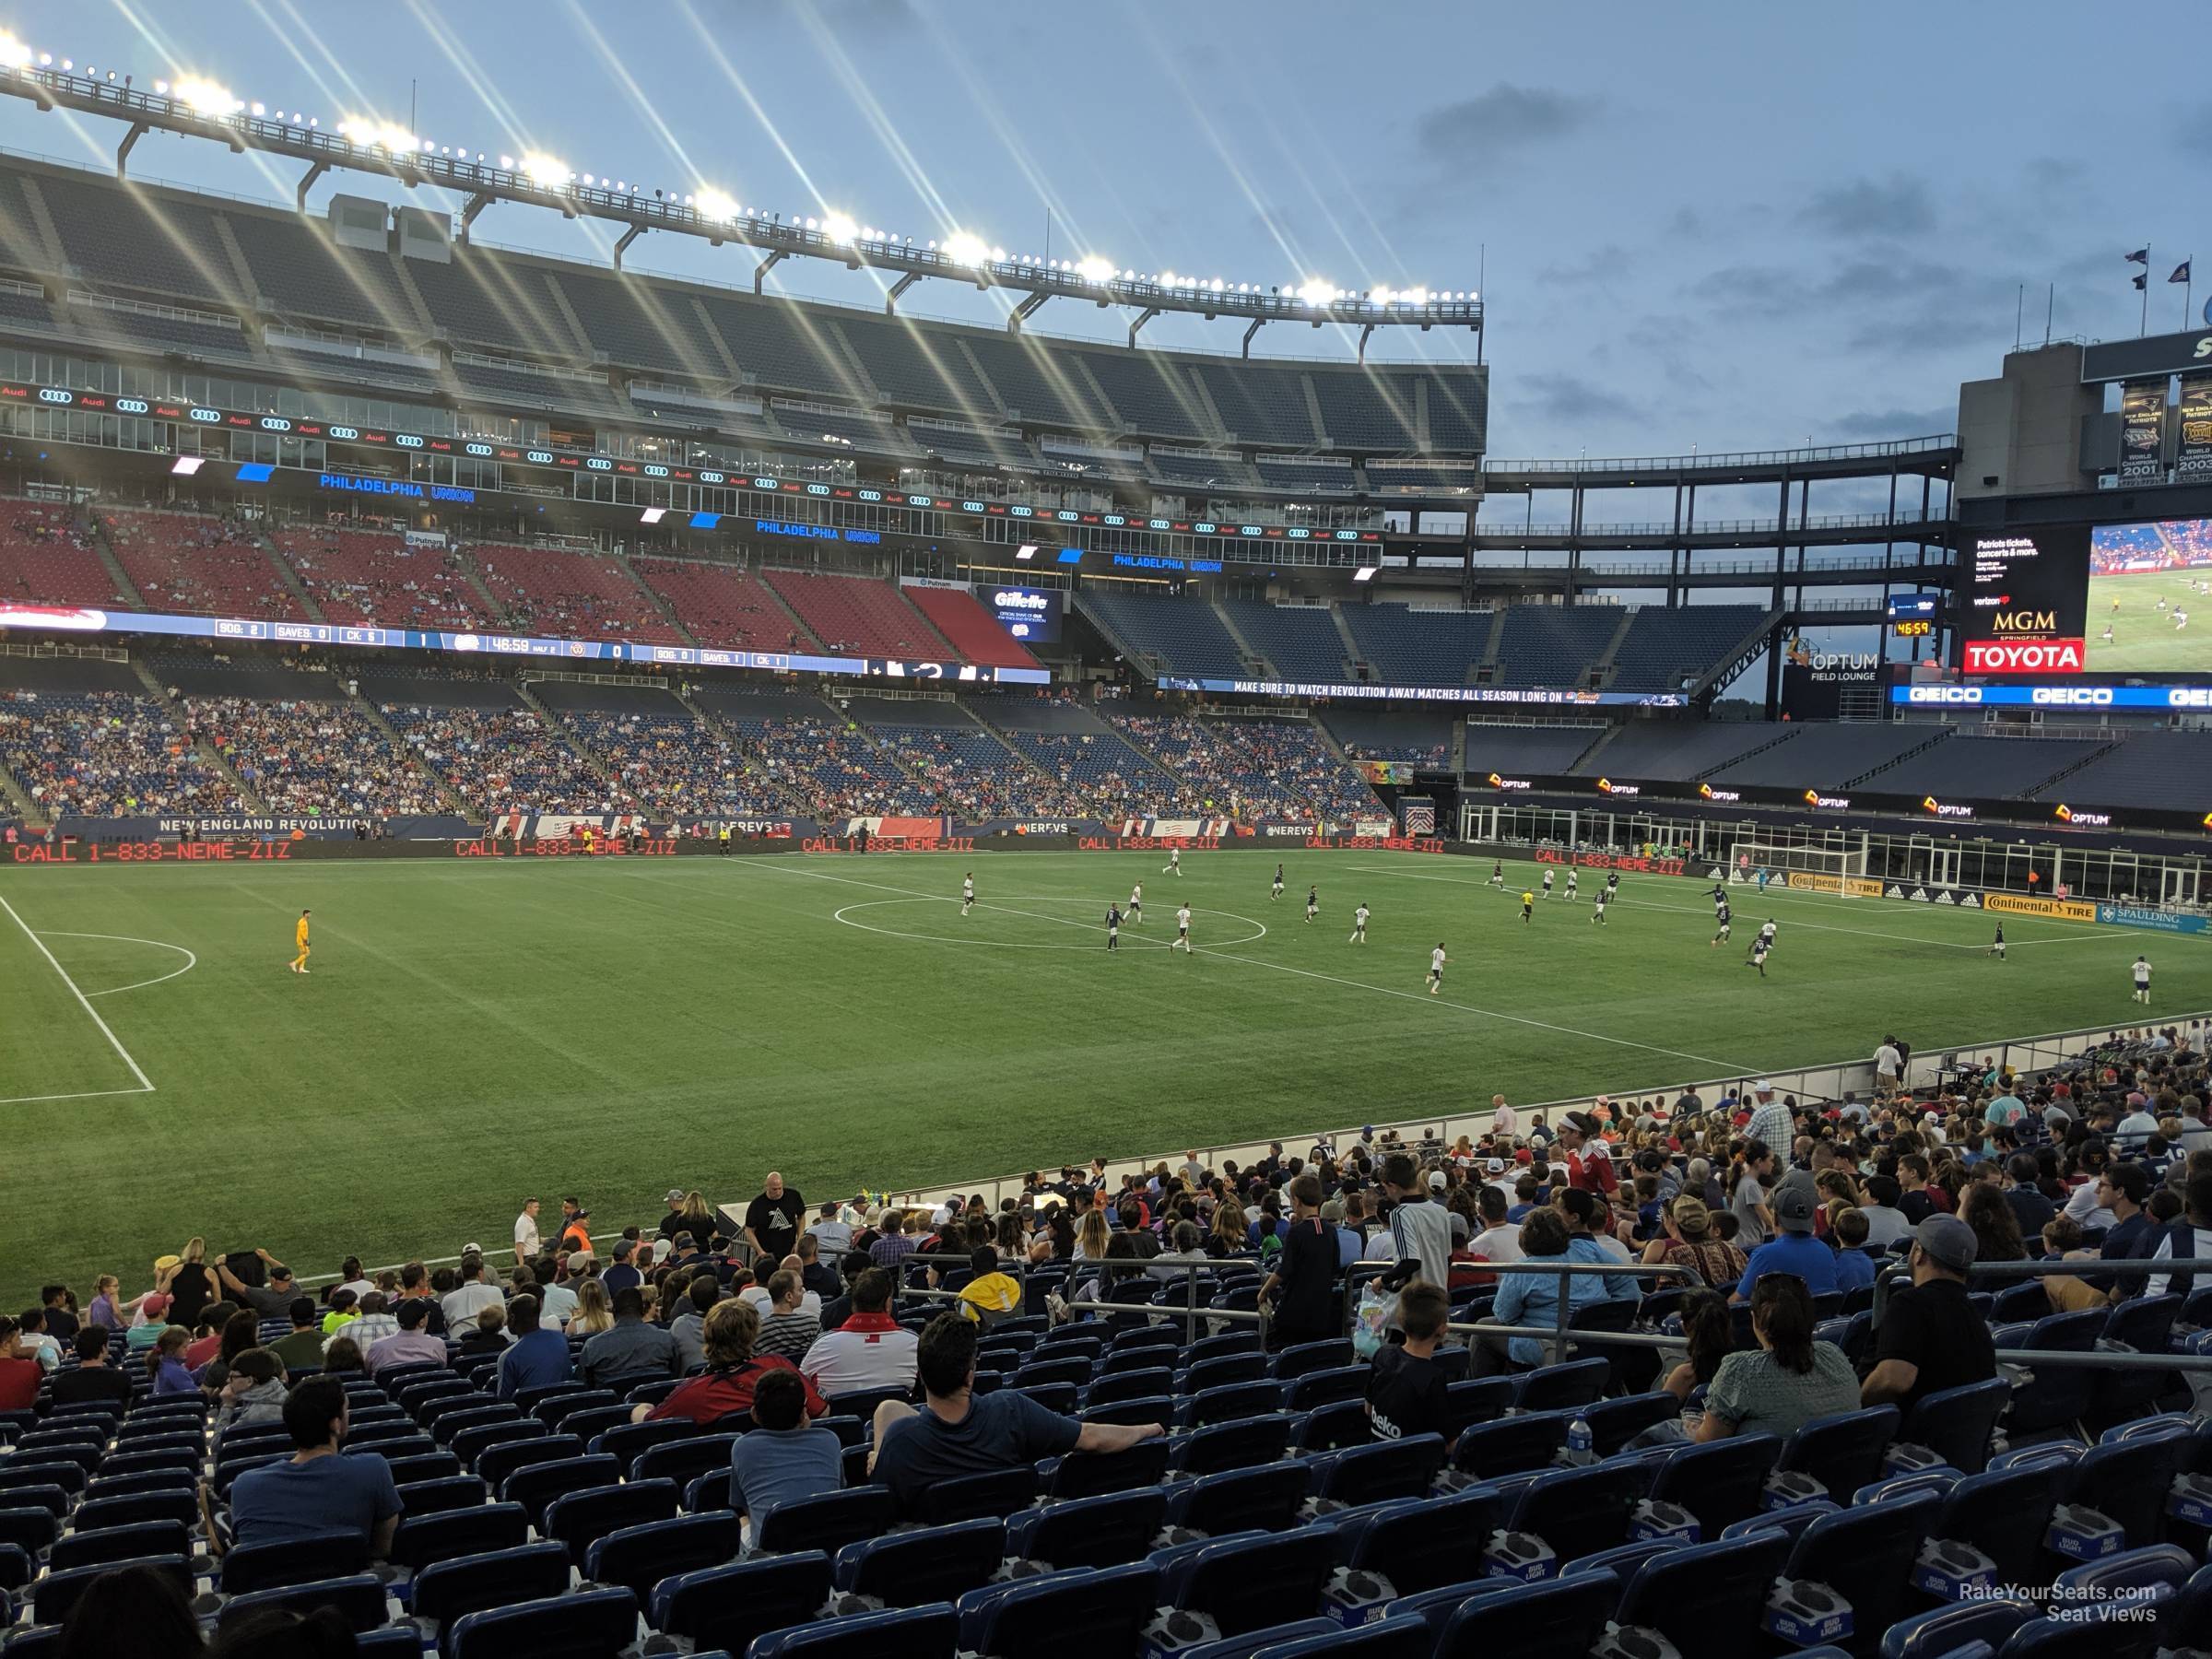 section 135, row 25 seat view  for soccer - gillette stadium